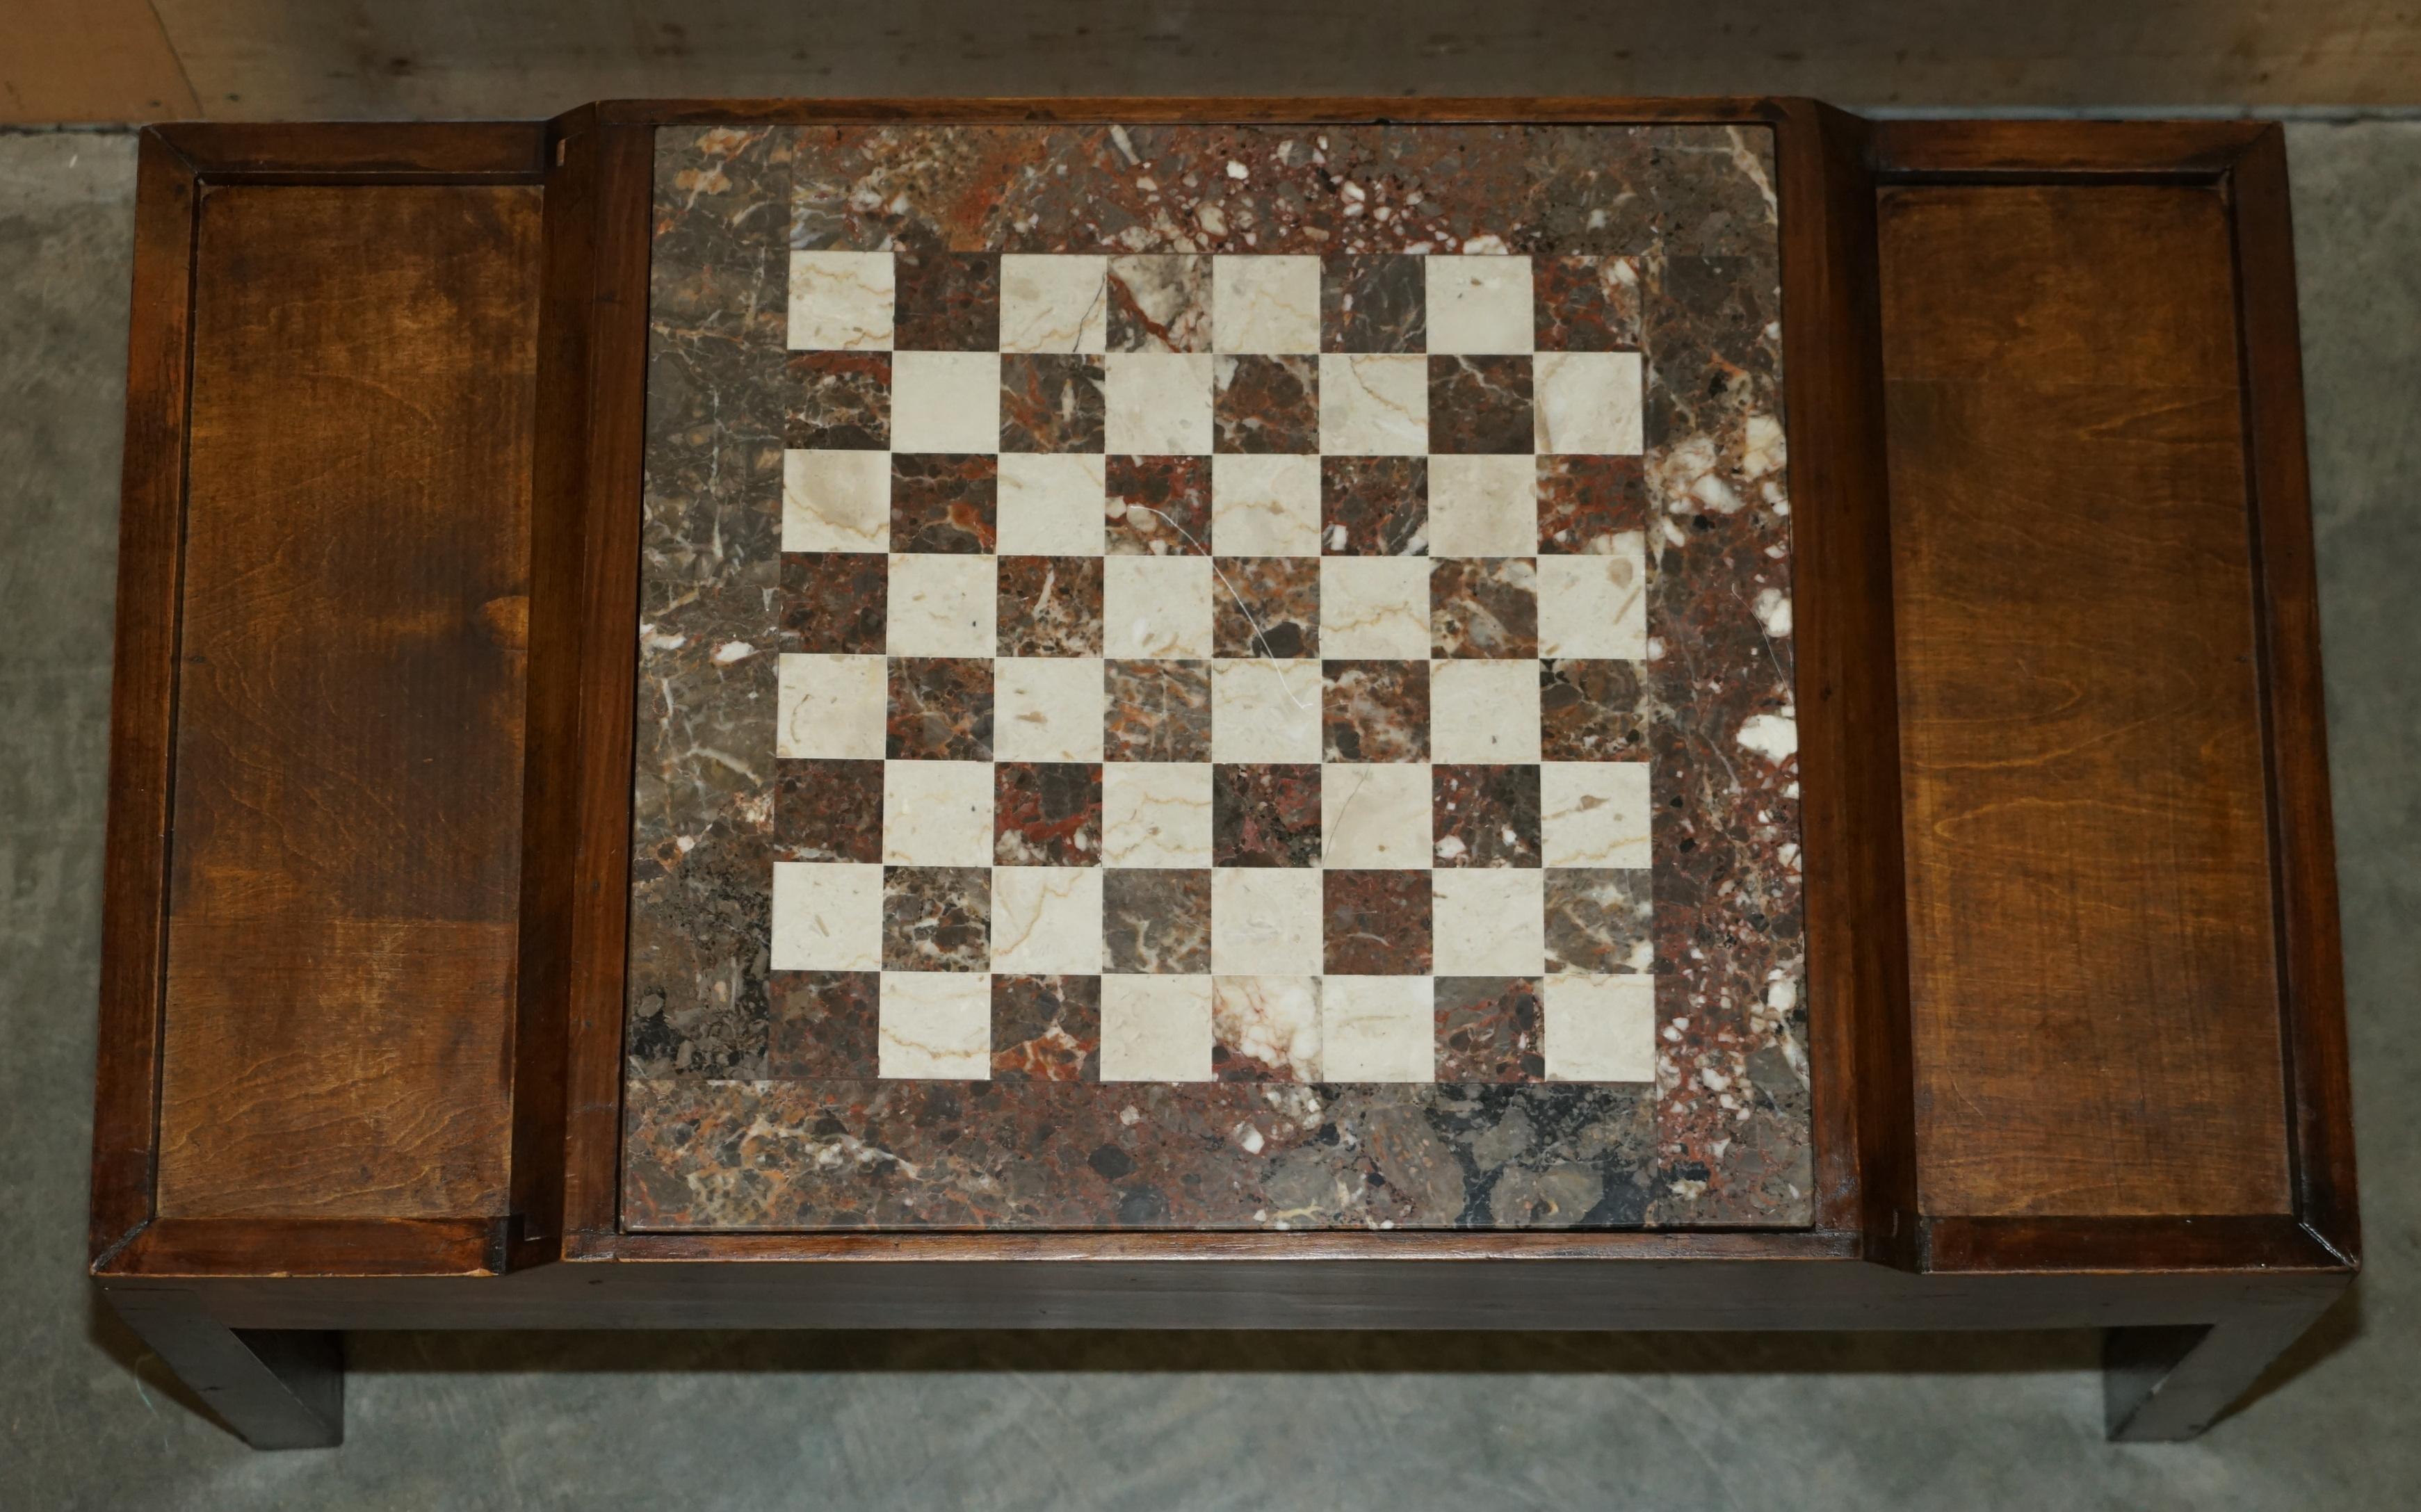 Vintage Chessboard Coffee Table with Marble Board and ebonized Chess Set Pieces 3